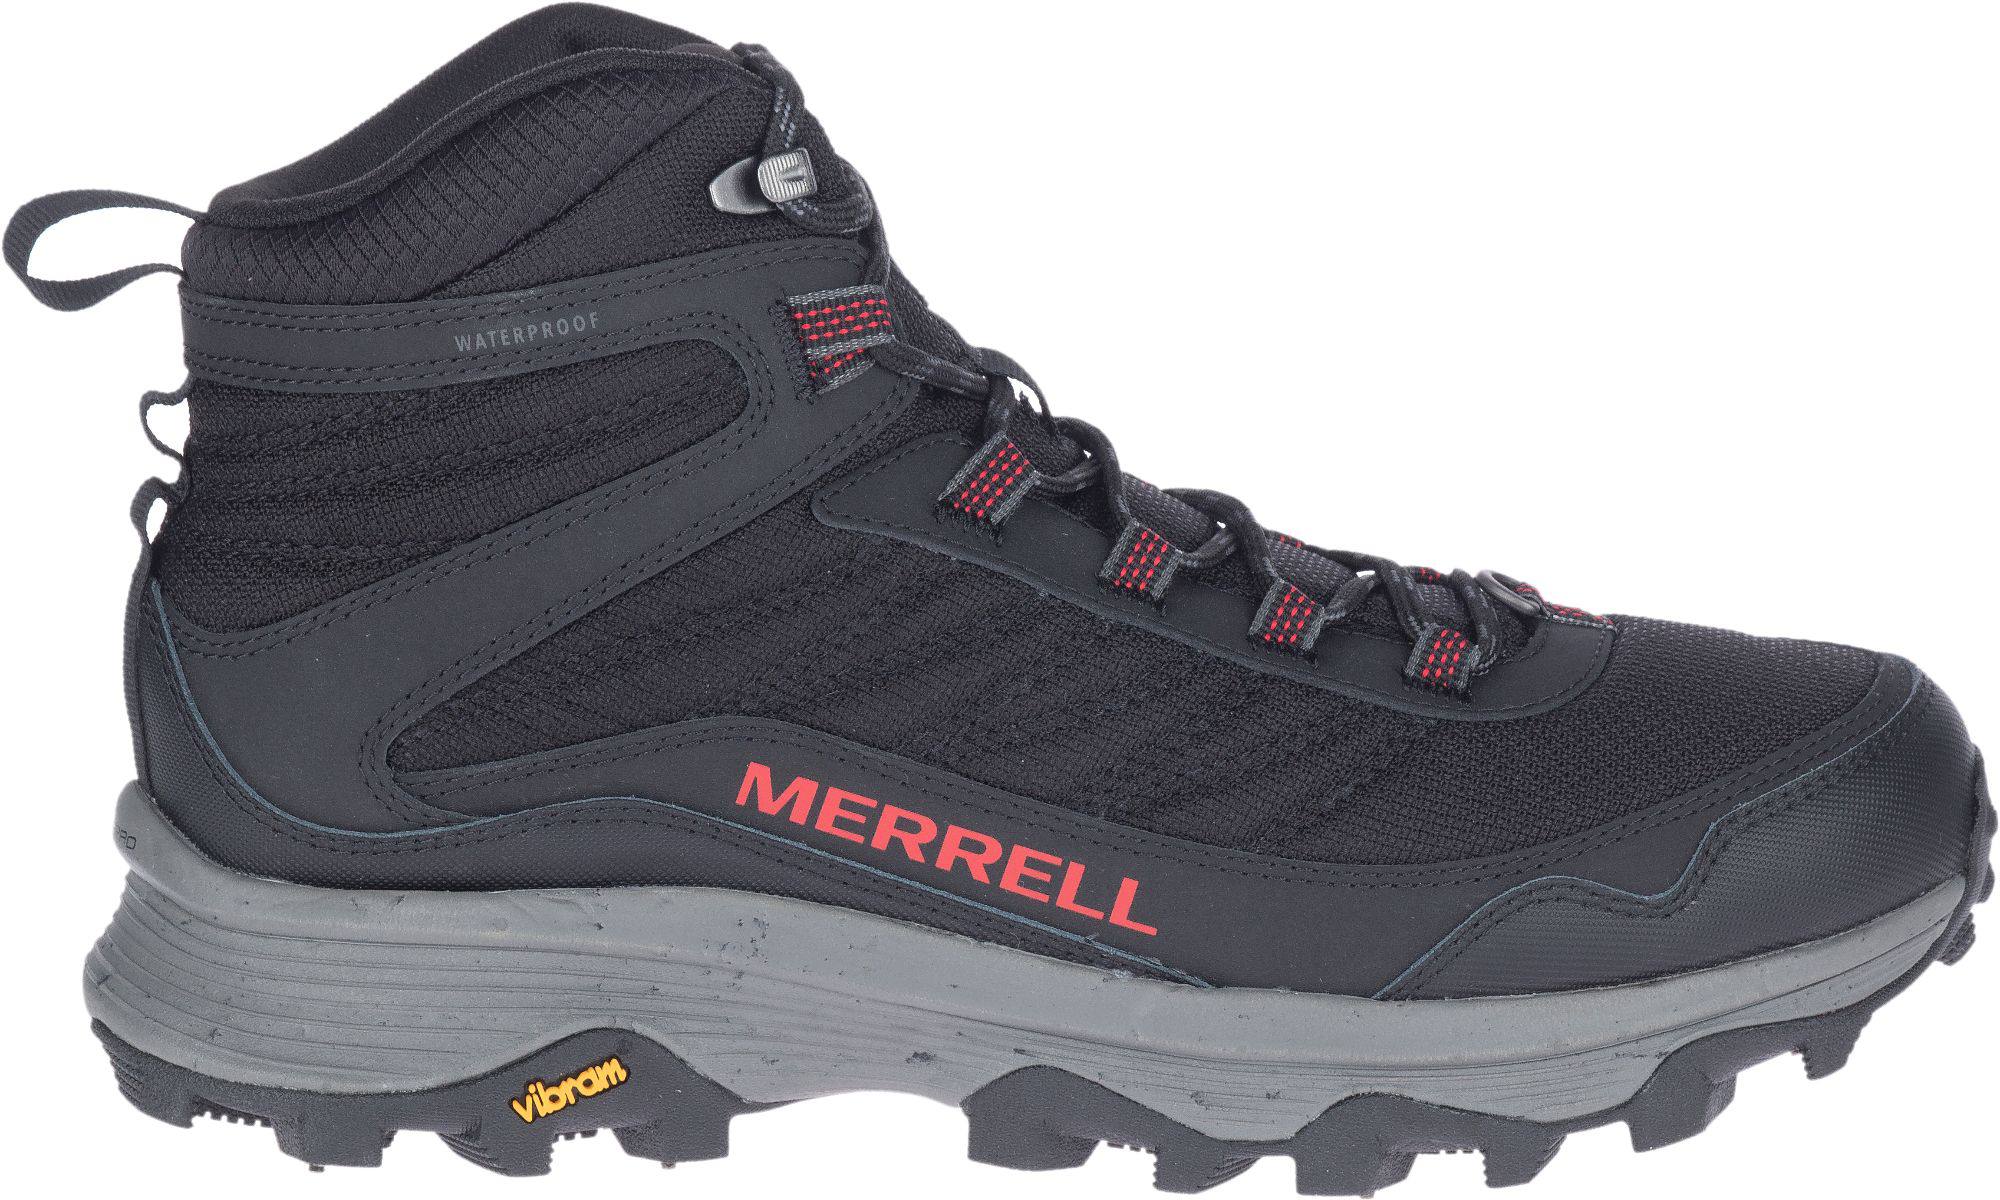 Merrell Men’s Speed Thermo Spike Mid